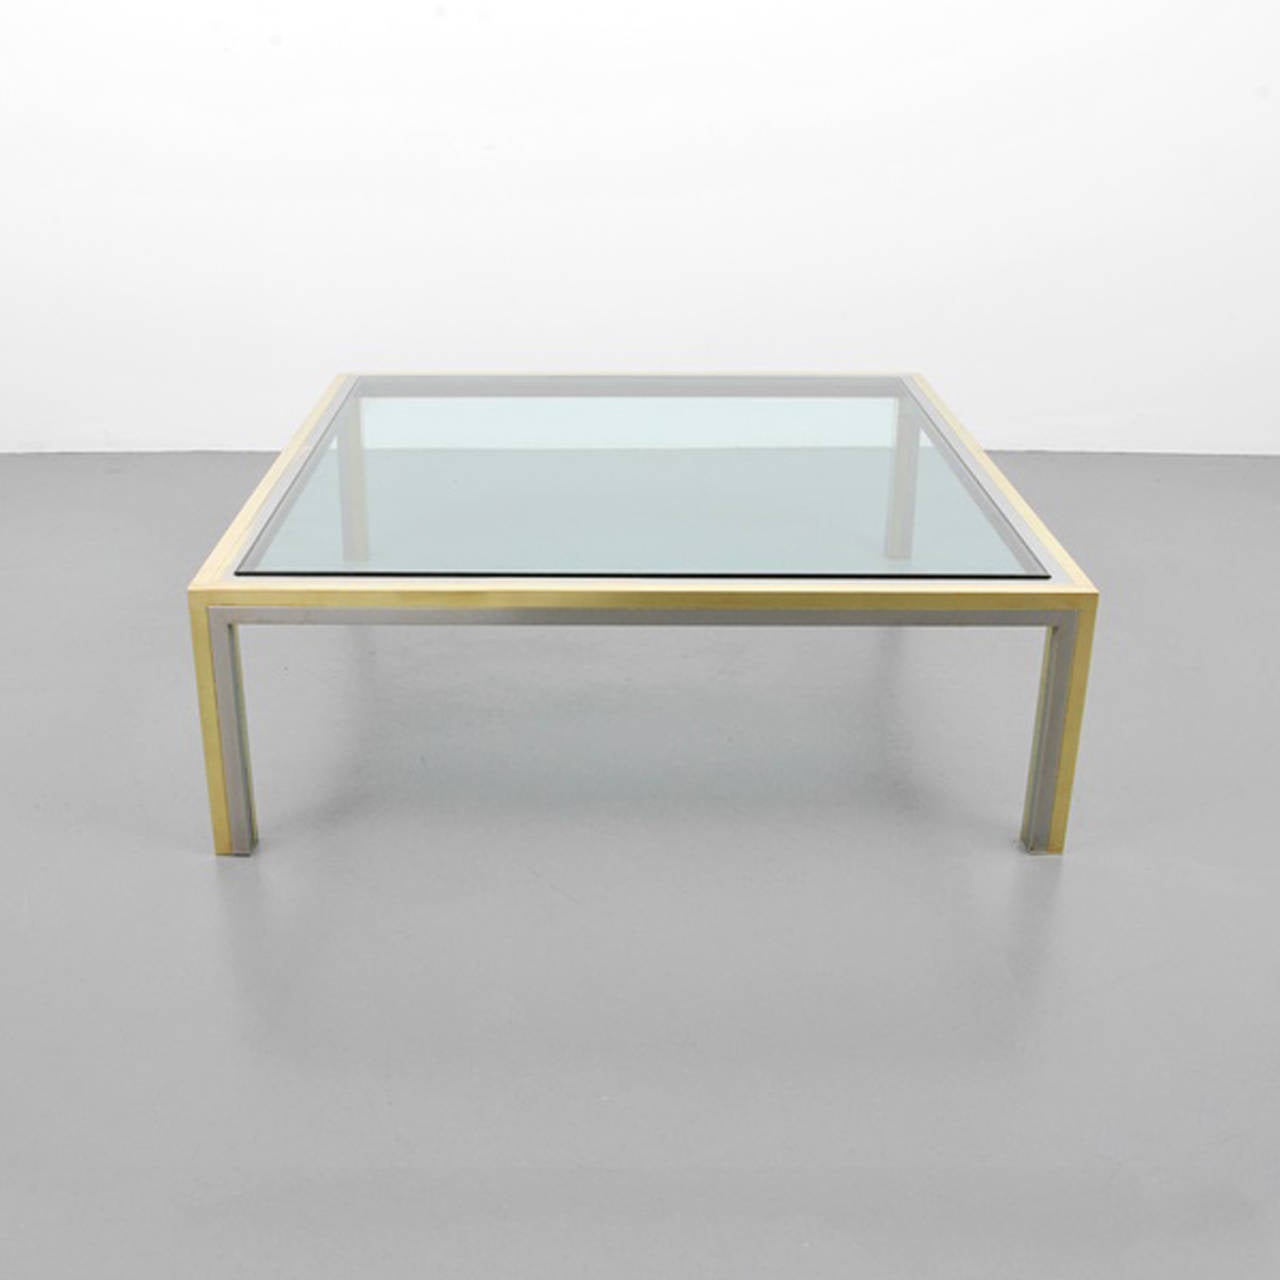 A brass and chrome coffee table with glass inset top by Romeo Rega, Italian, circa 1970s.